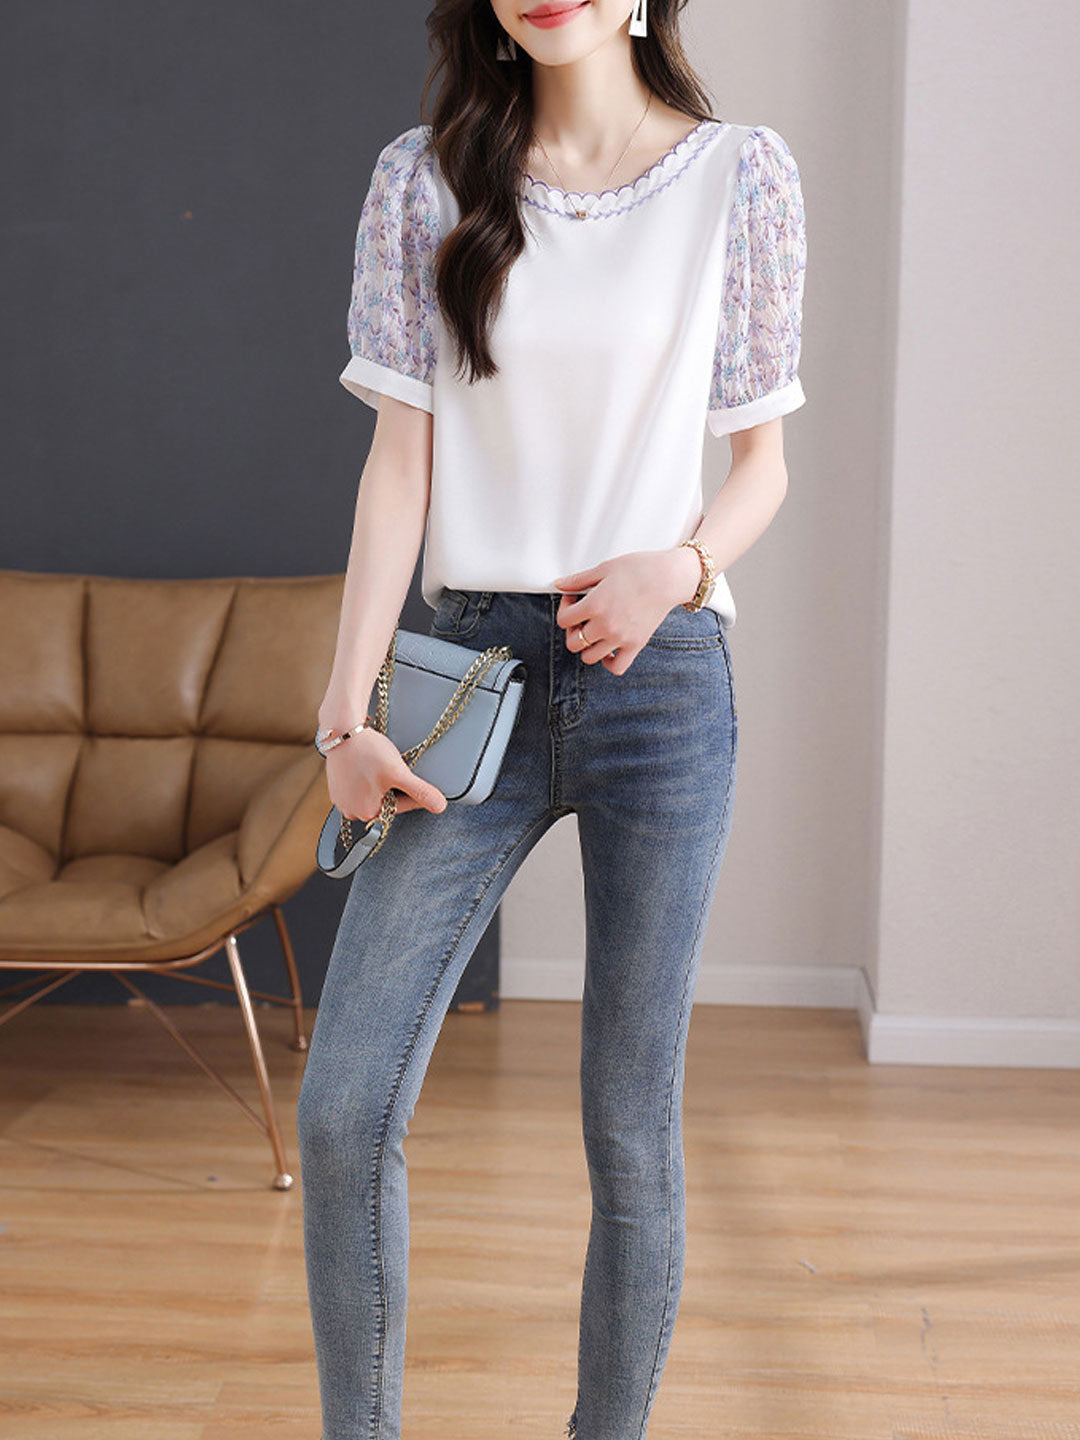 Chloe Classic Crew Neck Embroidered Floral Chiffon Top